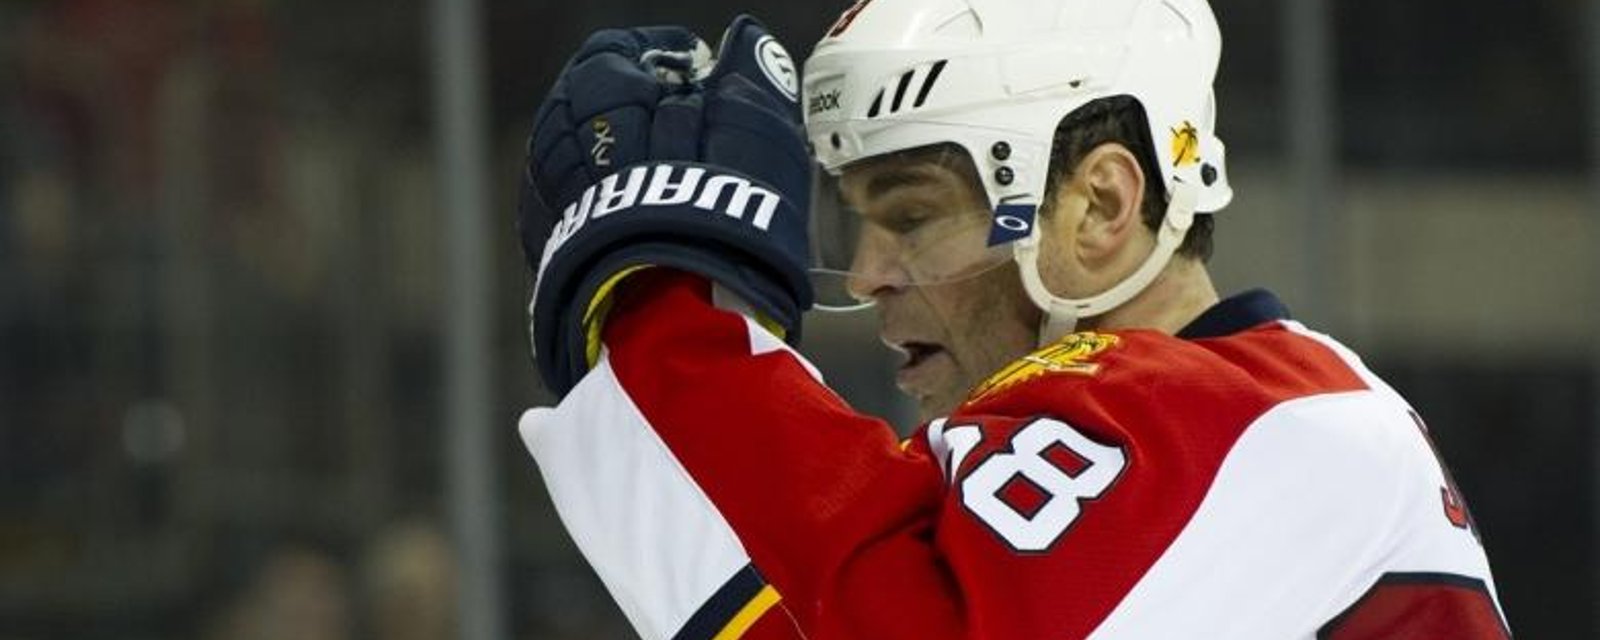 Report: NHL legend Jaromir Jagr reveals the meaning behind his jersey number.